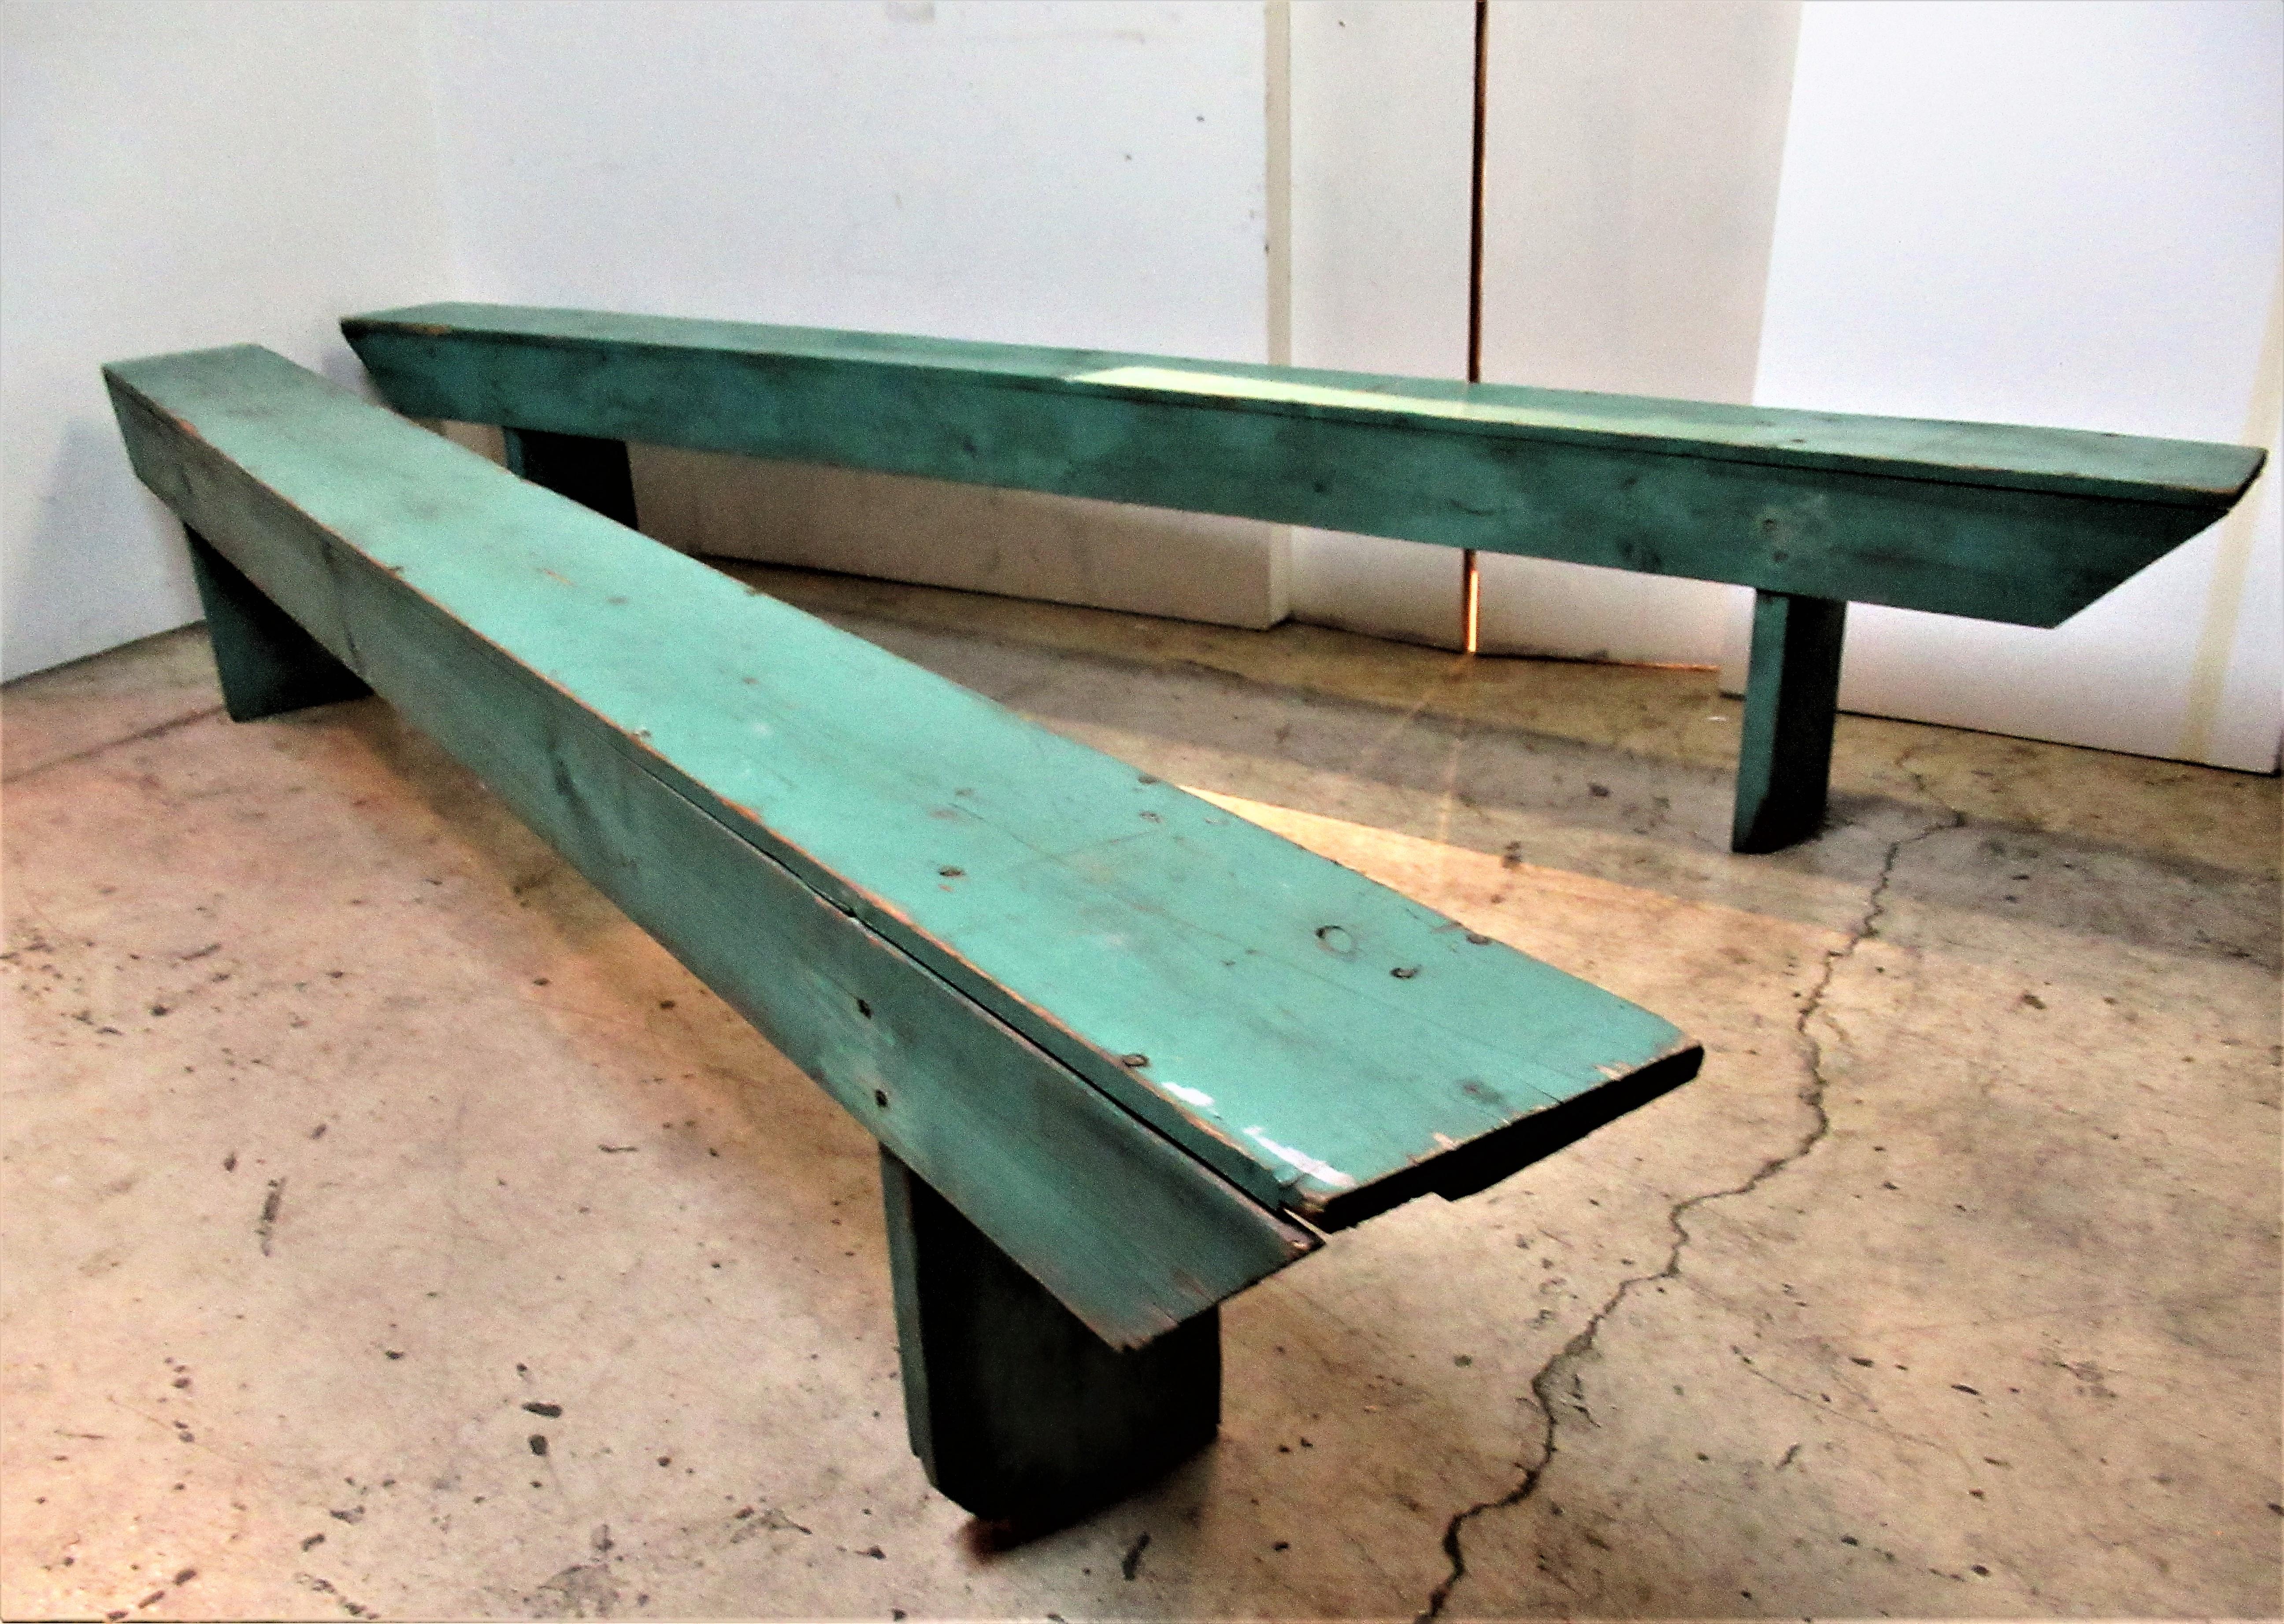 Pair of Primitive 10 foot long Minimalist form wood benches in the most beautifully aged original jewel tone dry green painted surface, American, circa 1940.